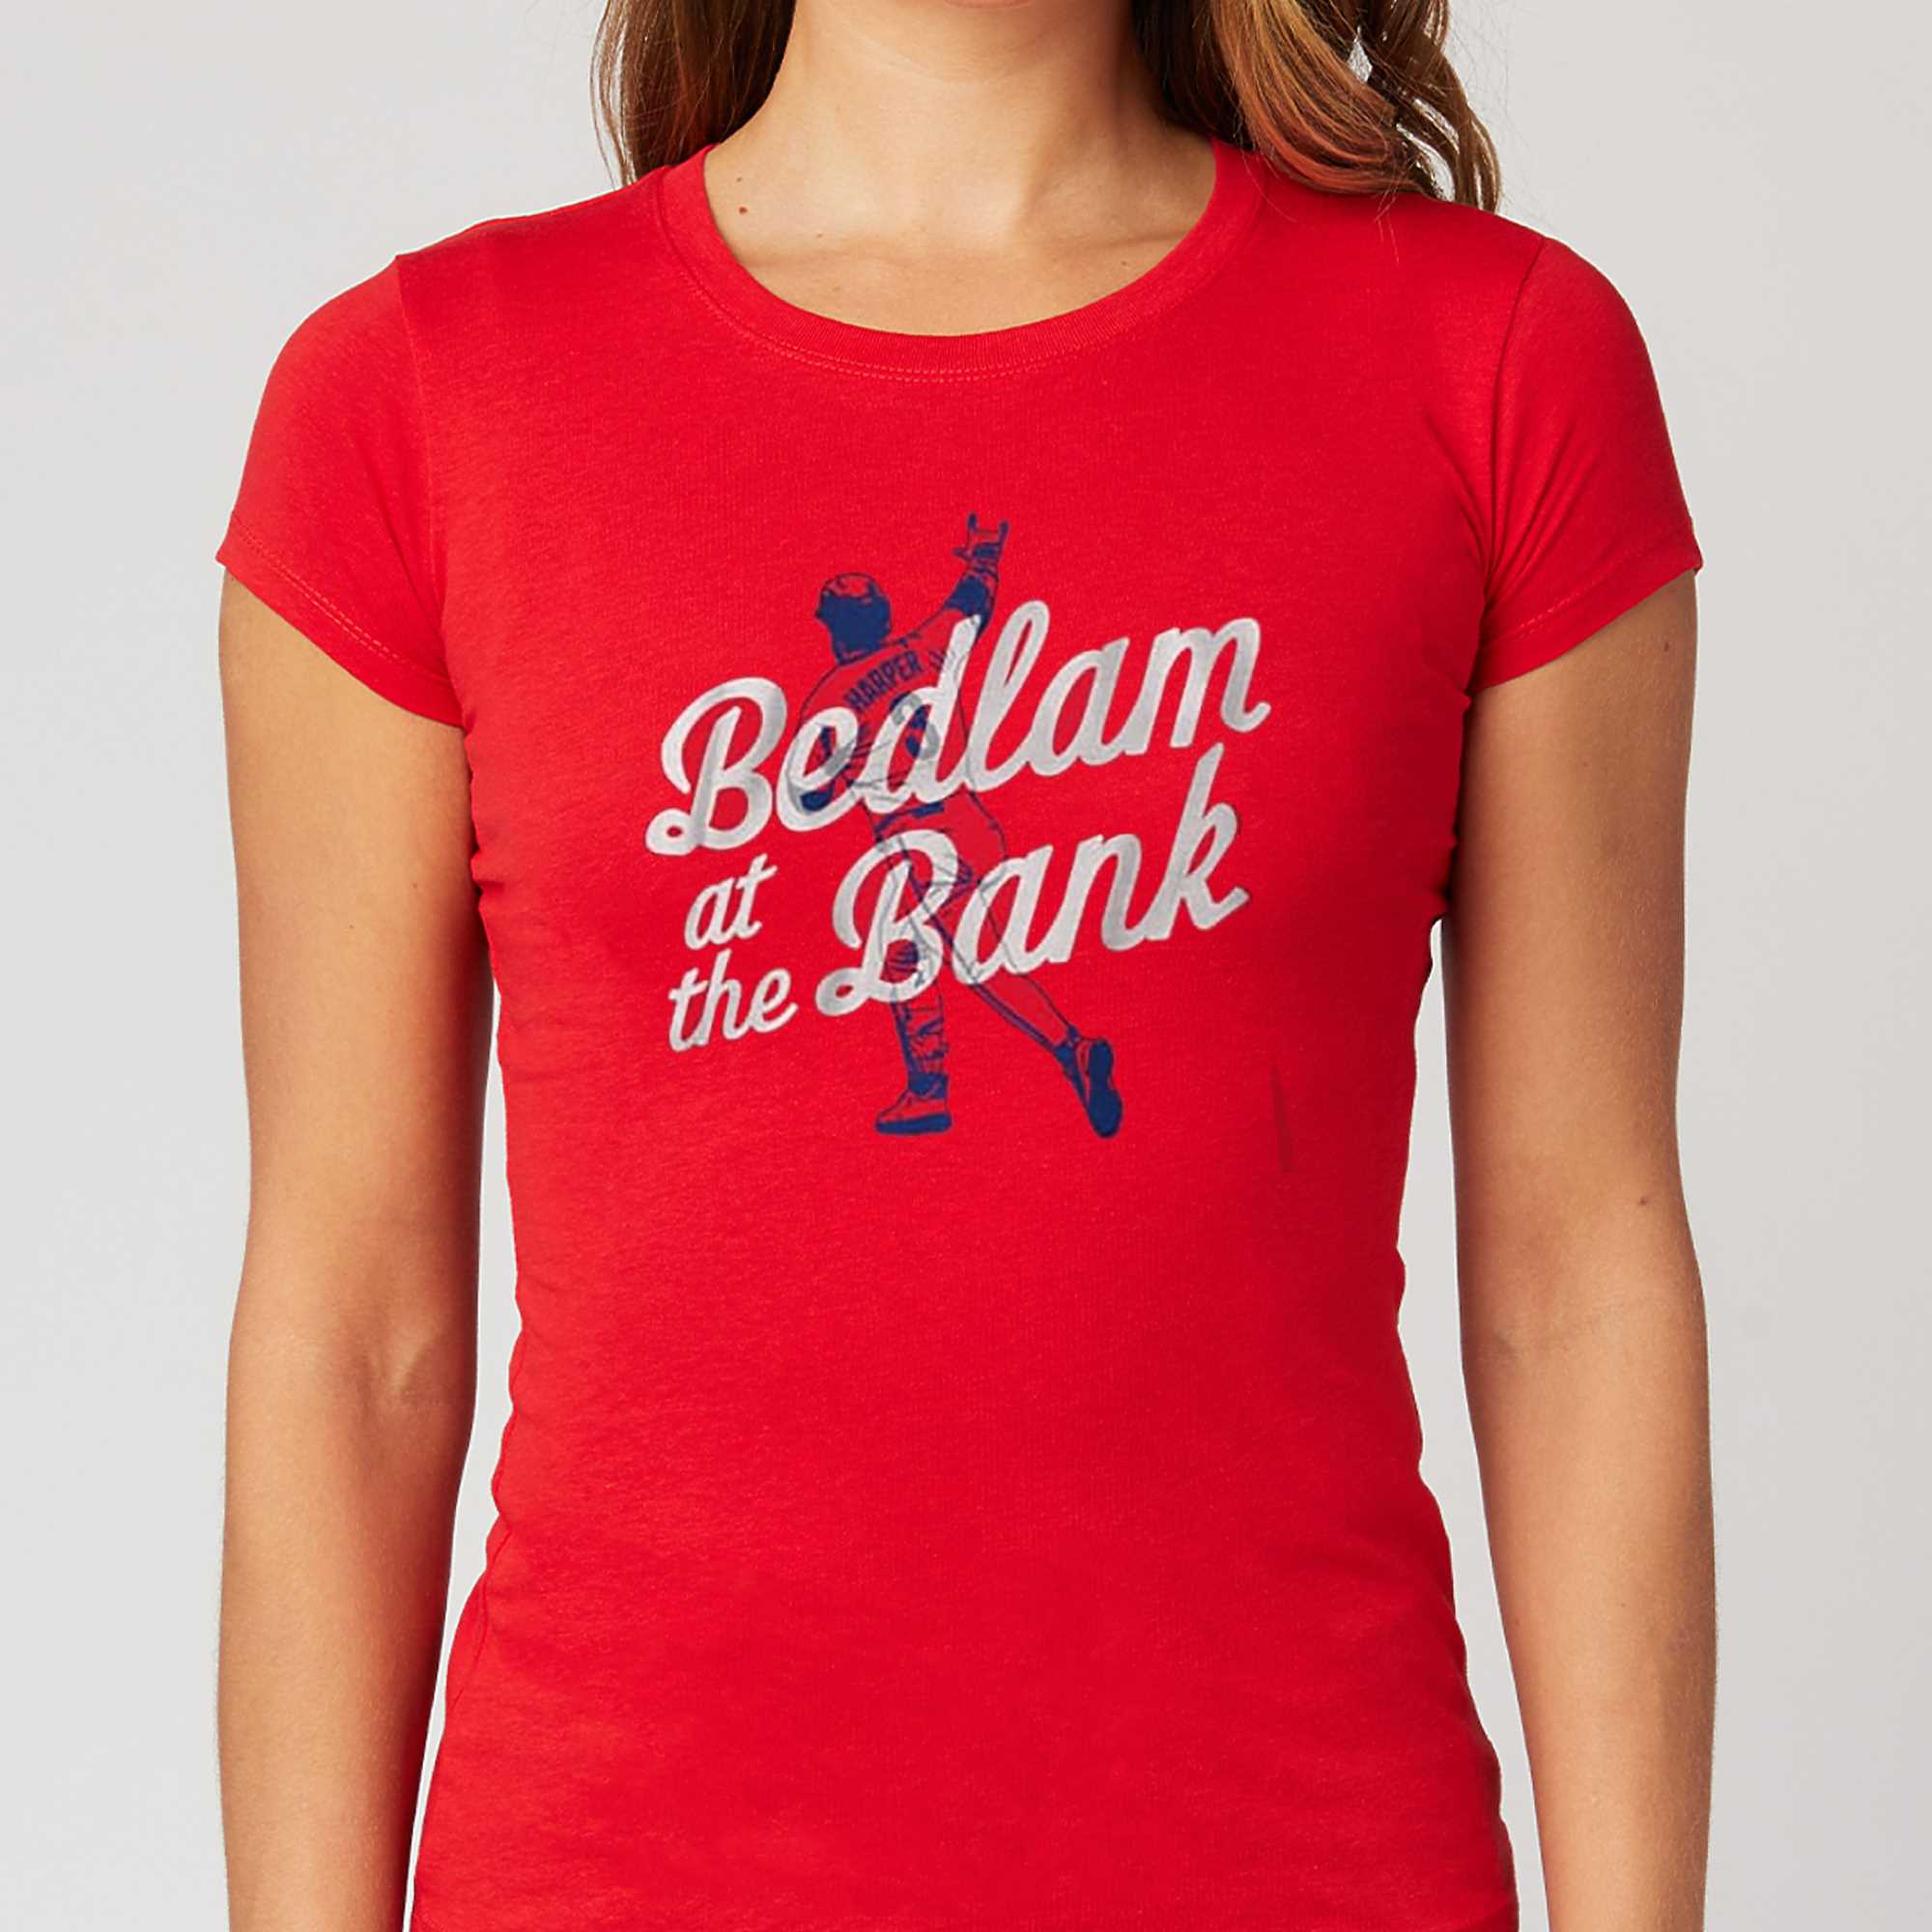 The Fightins Bryce Harper Bedlam At The Bank Shirt, hoodie